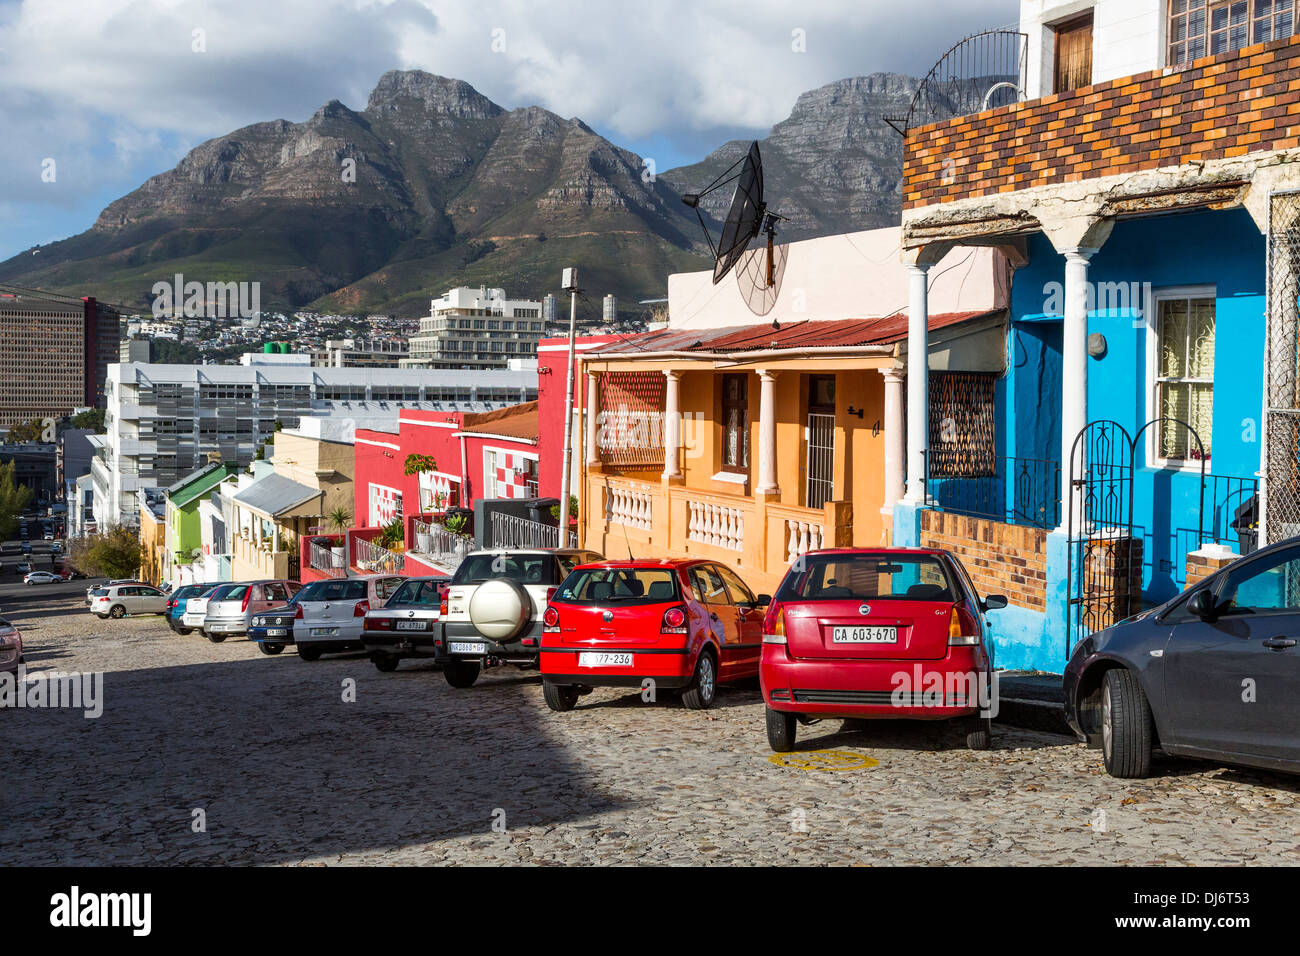 South Africa, Cape Town, Bo-kaap Street Scene. Table Mountain in background. Stock Photo